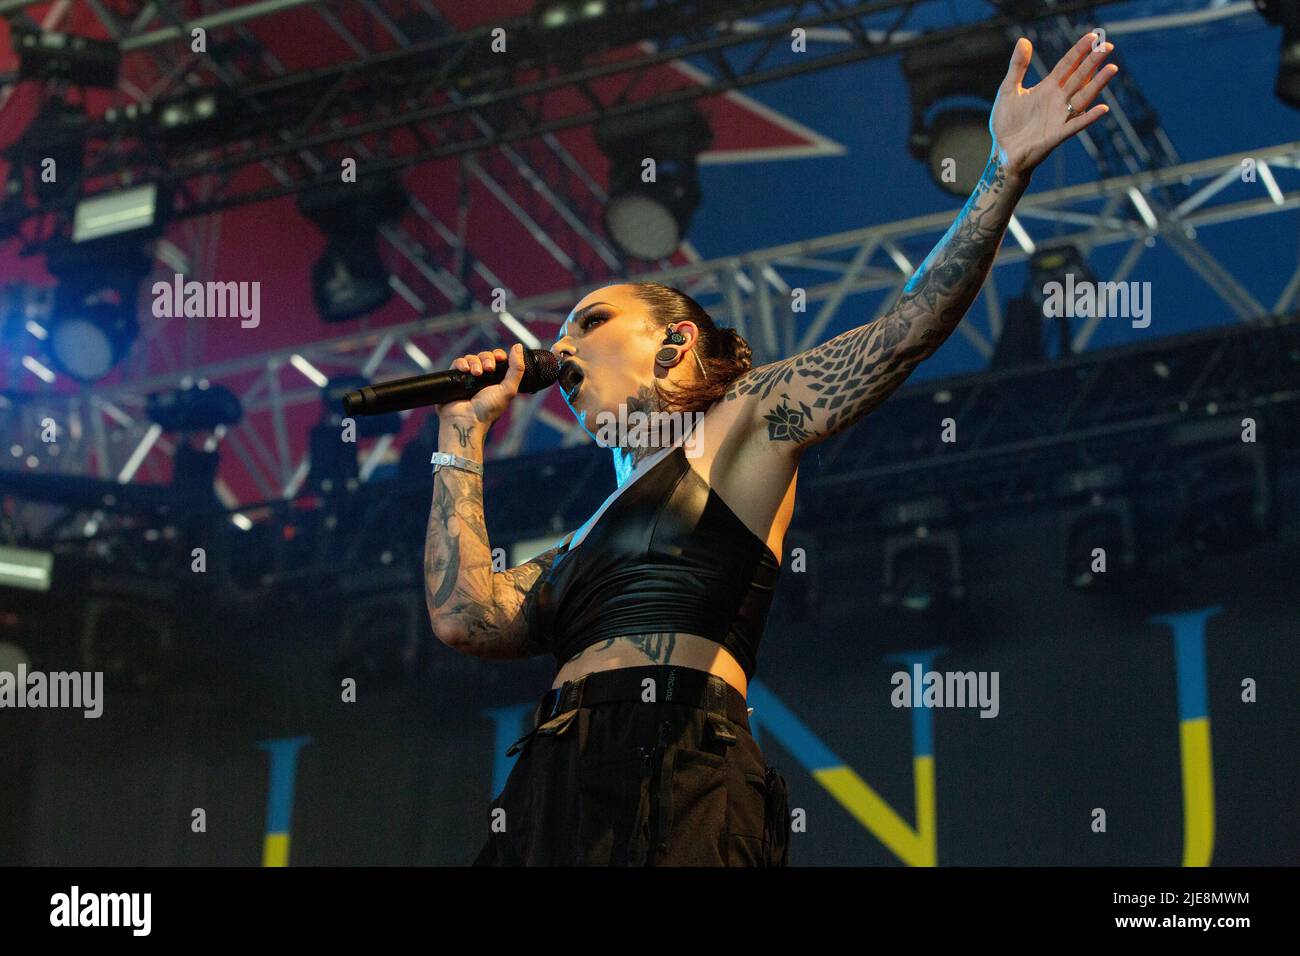 Oslo, Norway. 24th, June 2022. The Ukrainian heavy metal band Jinjer performs a live concert during the Norwegian music festival Tons of Rock 2022 in Oslo. Here vocalist Tatiana Shmailyuk is seen live on stage. (Photo credit: Gonzales Photo - Per-Otto Oppi). Stock Photo